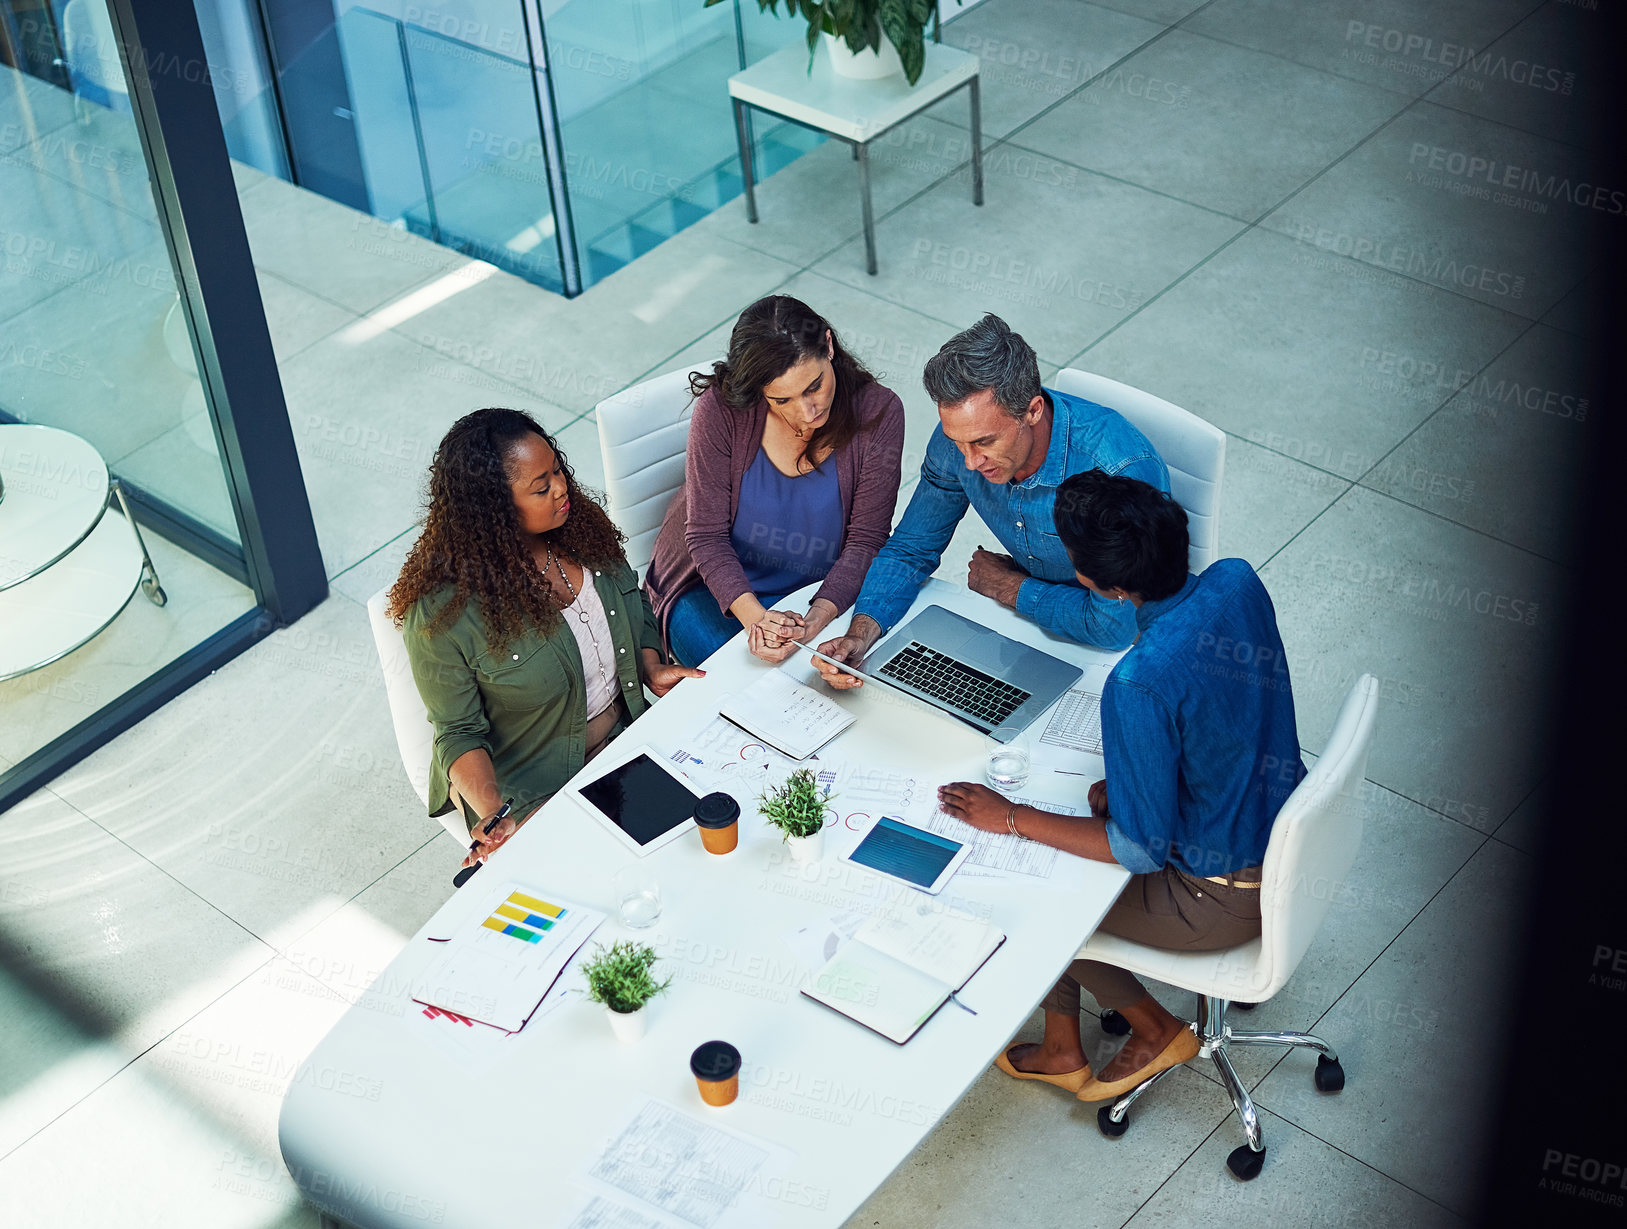 Buy stock photo High angle shot of a group of designers having a meeting in an office